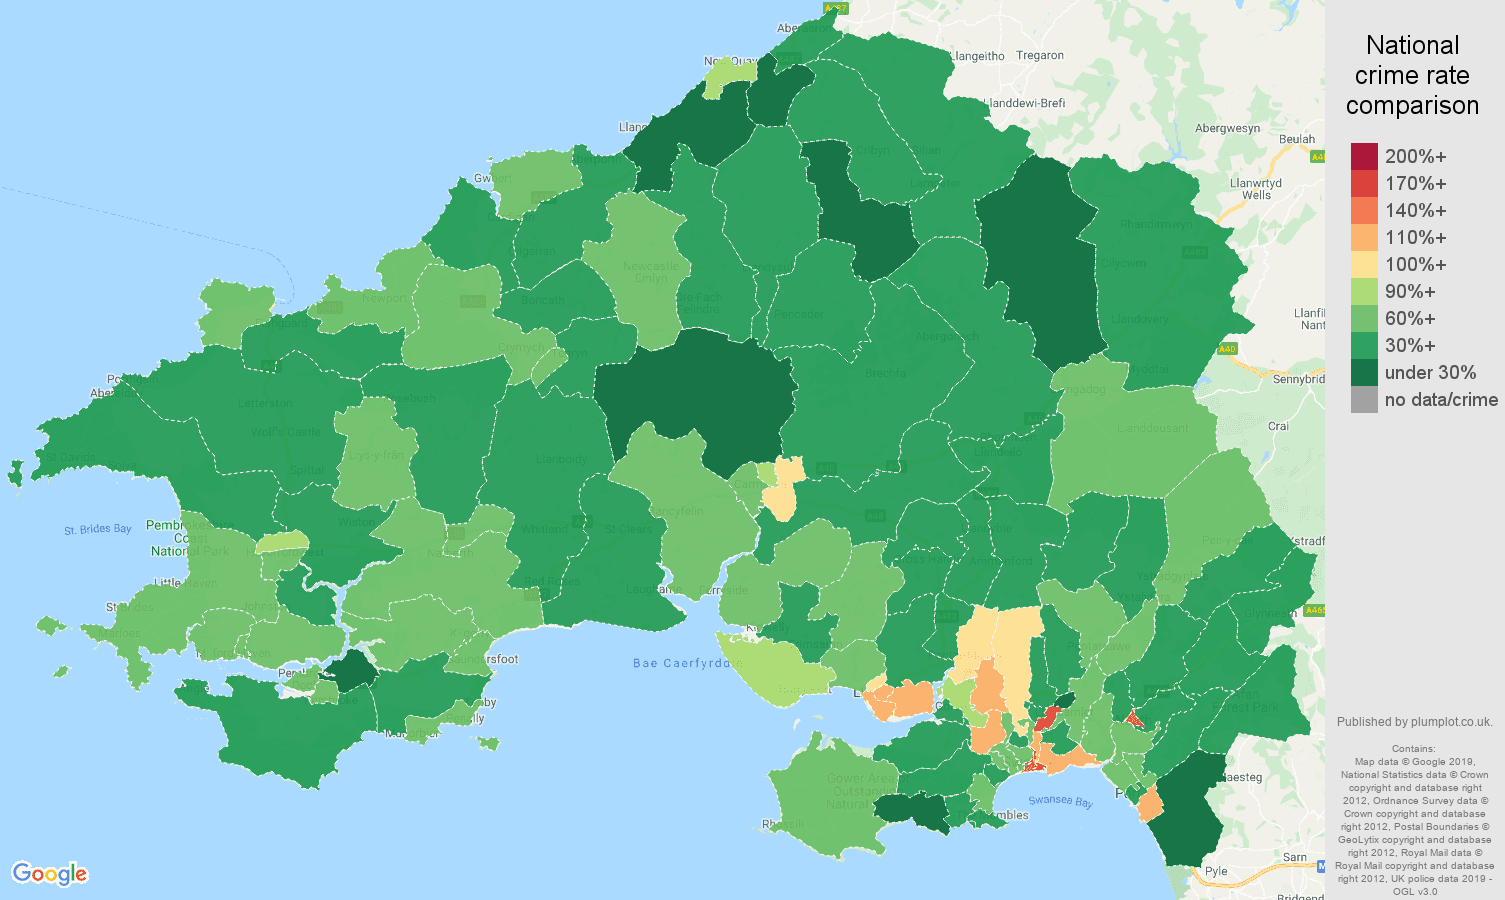 Swansea other theft crime rate comparison map